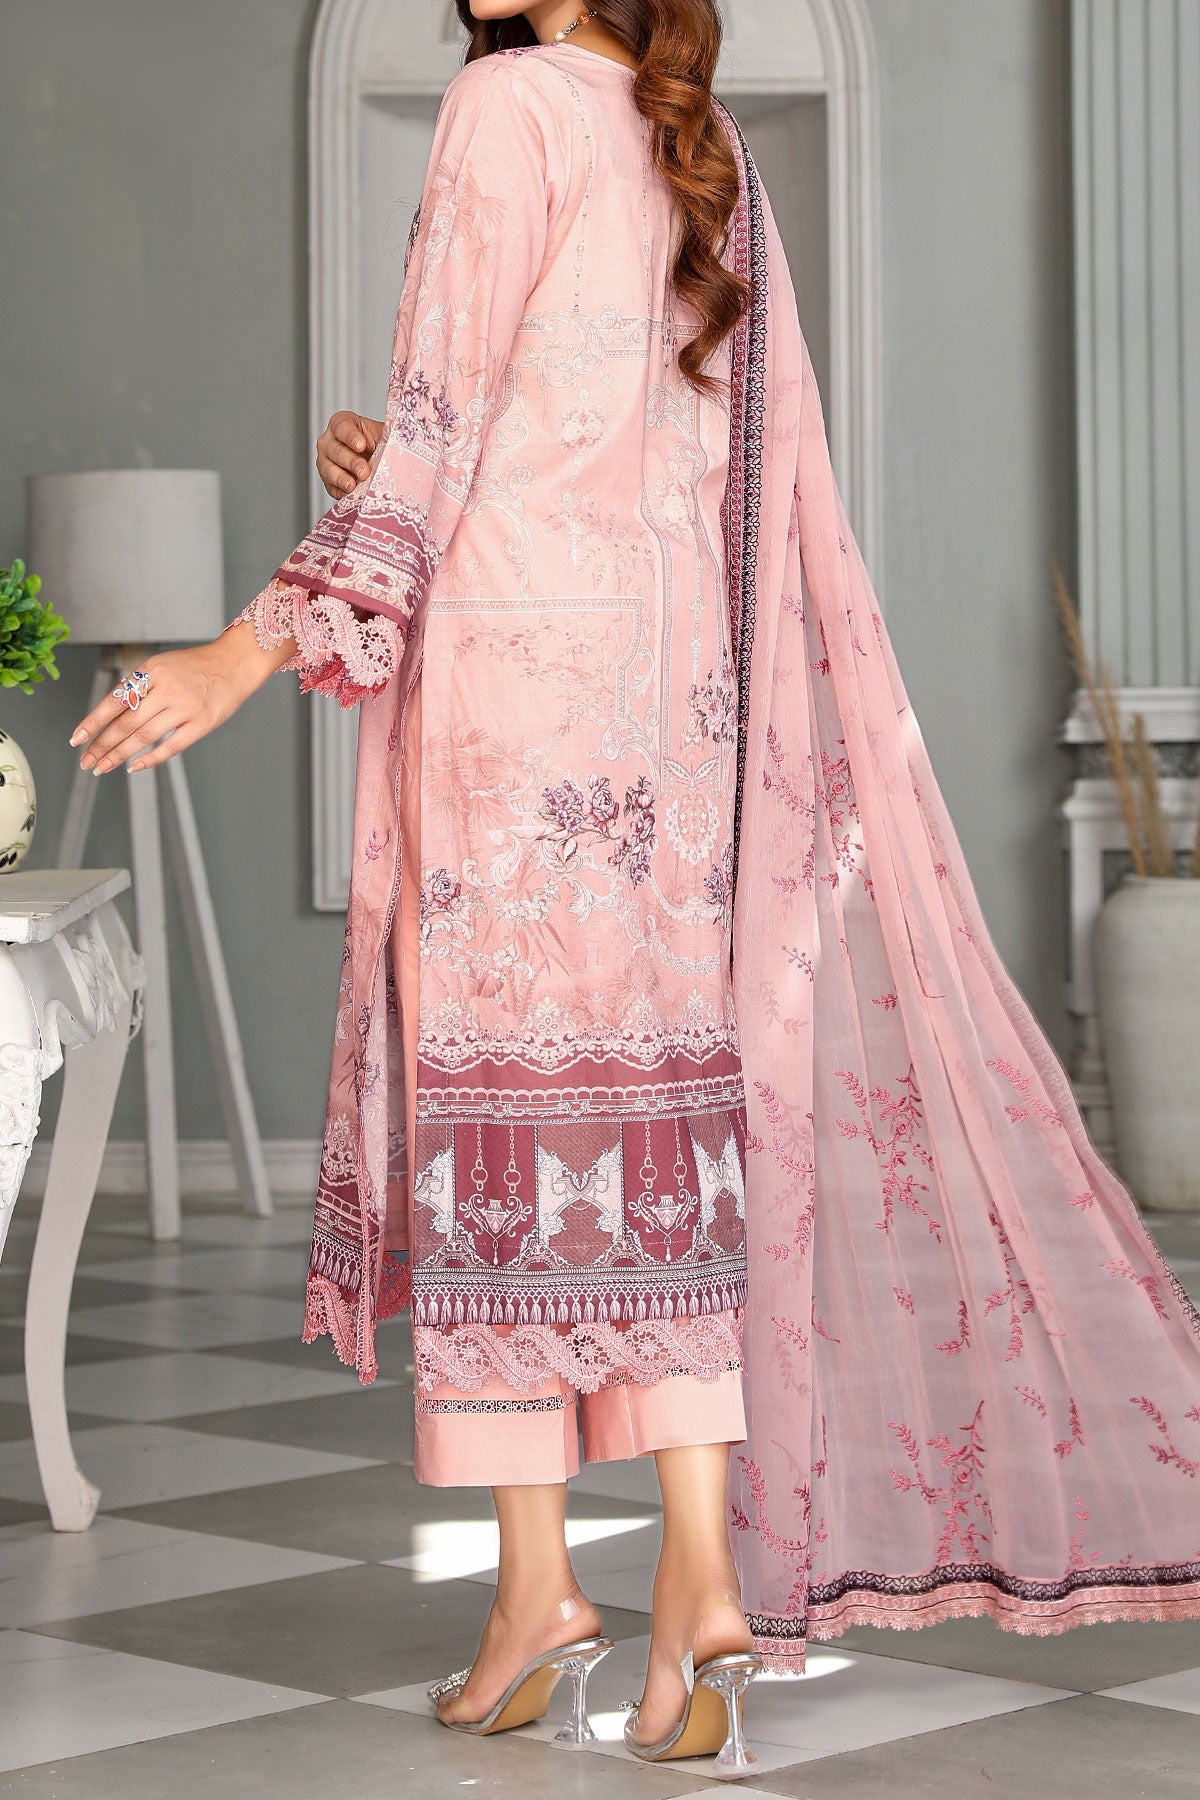 Blush Blossom - Unstitched 3-Piece Ensemble in Light Pink Suit For Women